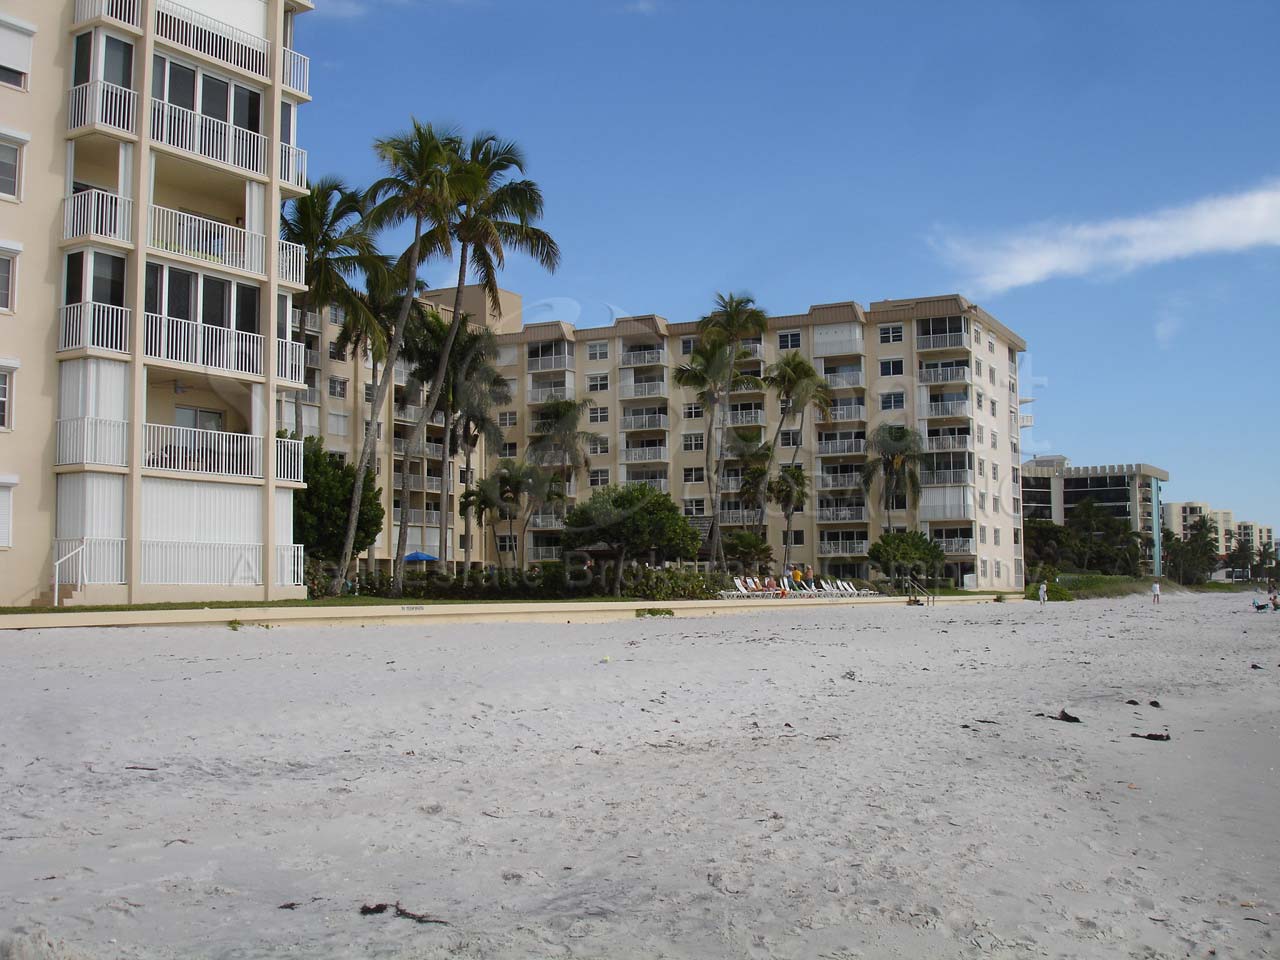 Naples Continental View of Beach